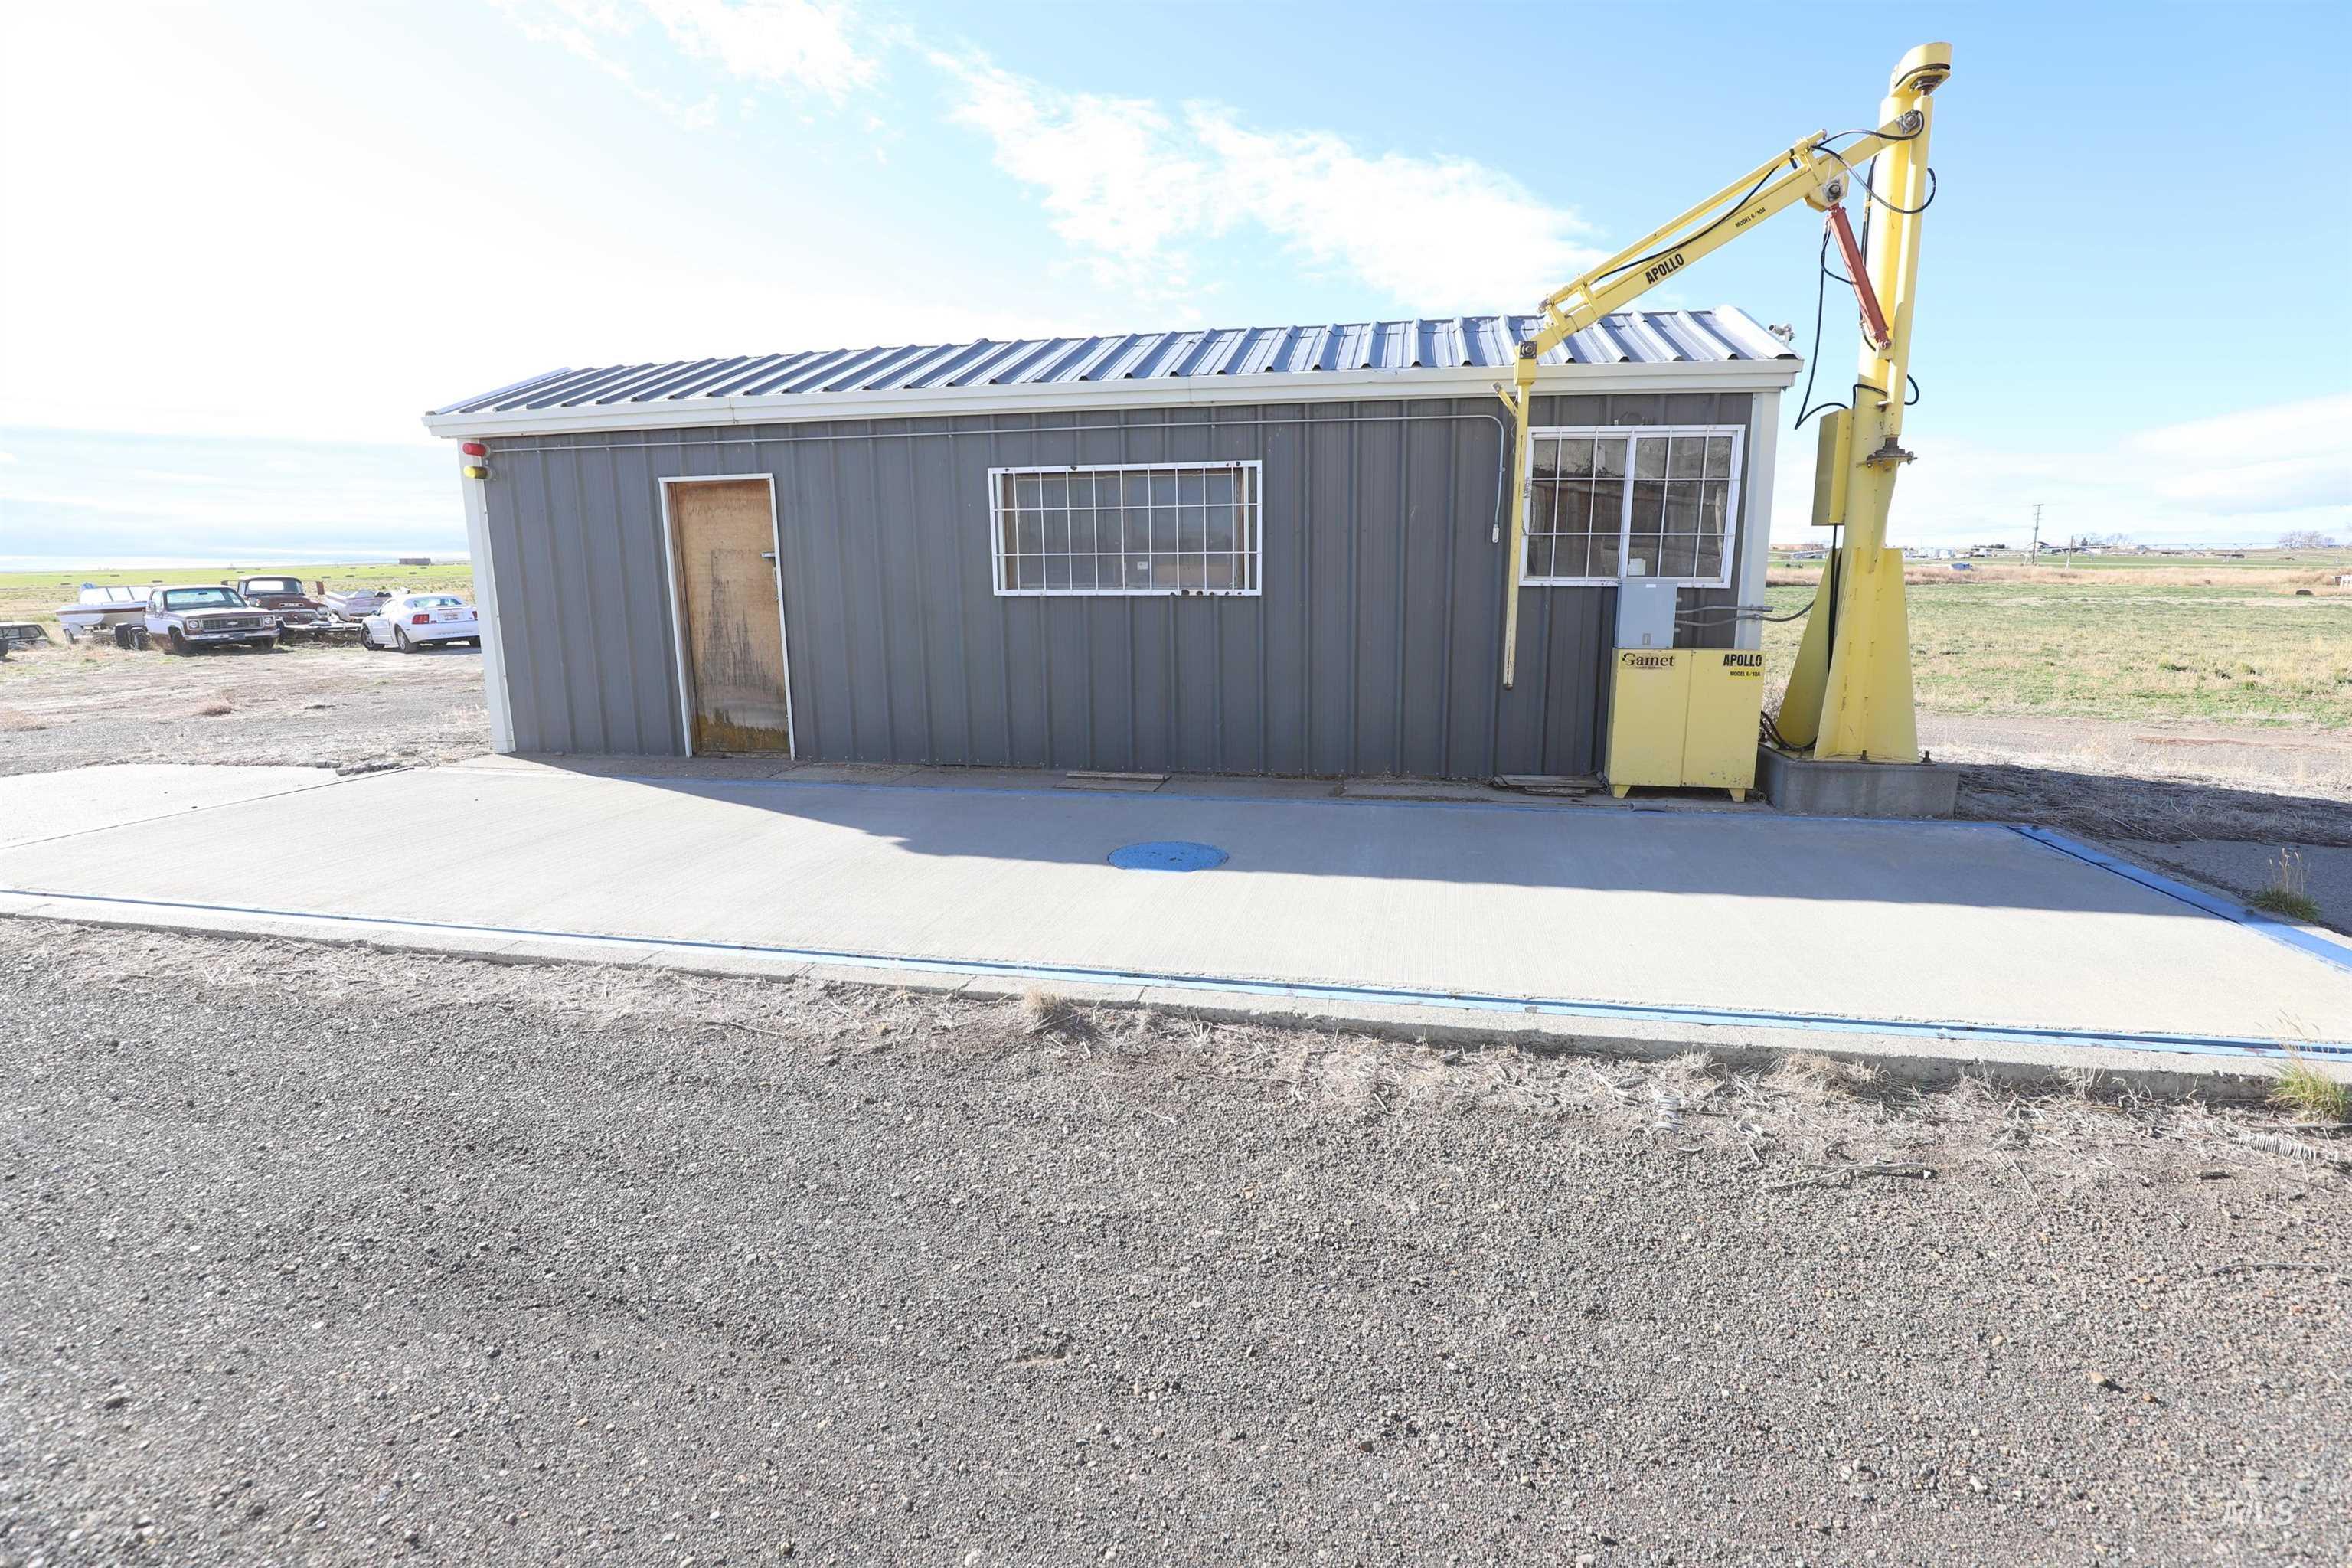 TBD 3250 North, Berger, Idaho 83301, Business/Commercial For Sale, Price $100,000,MLS 98825477